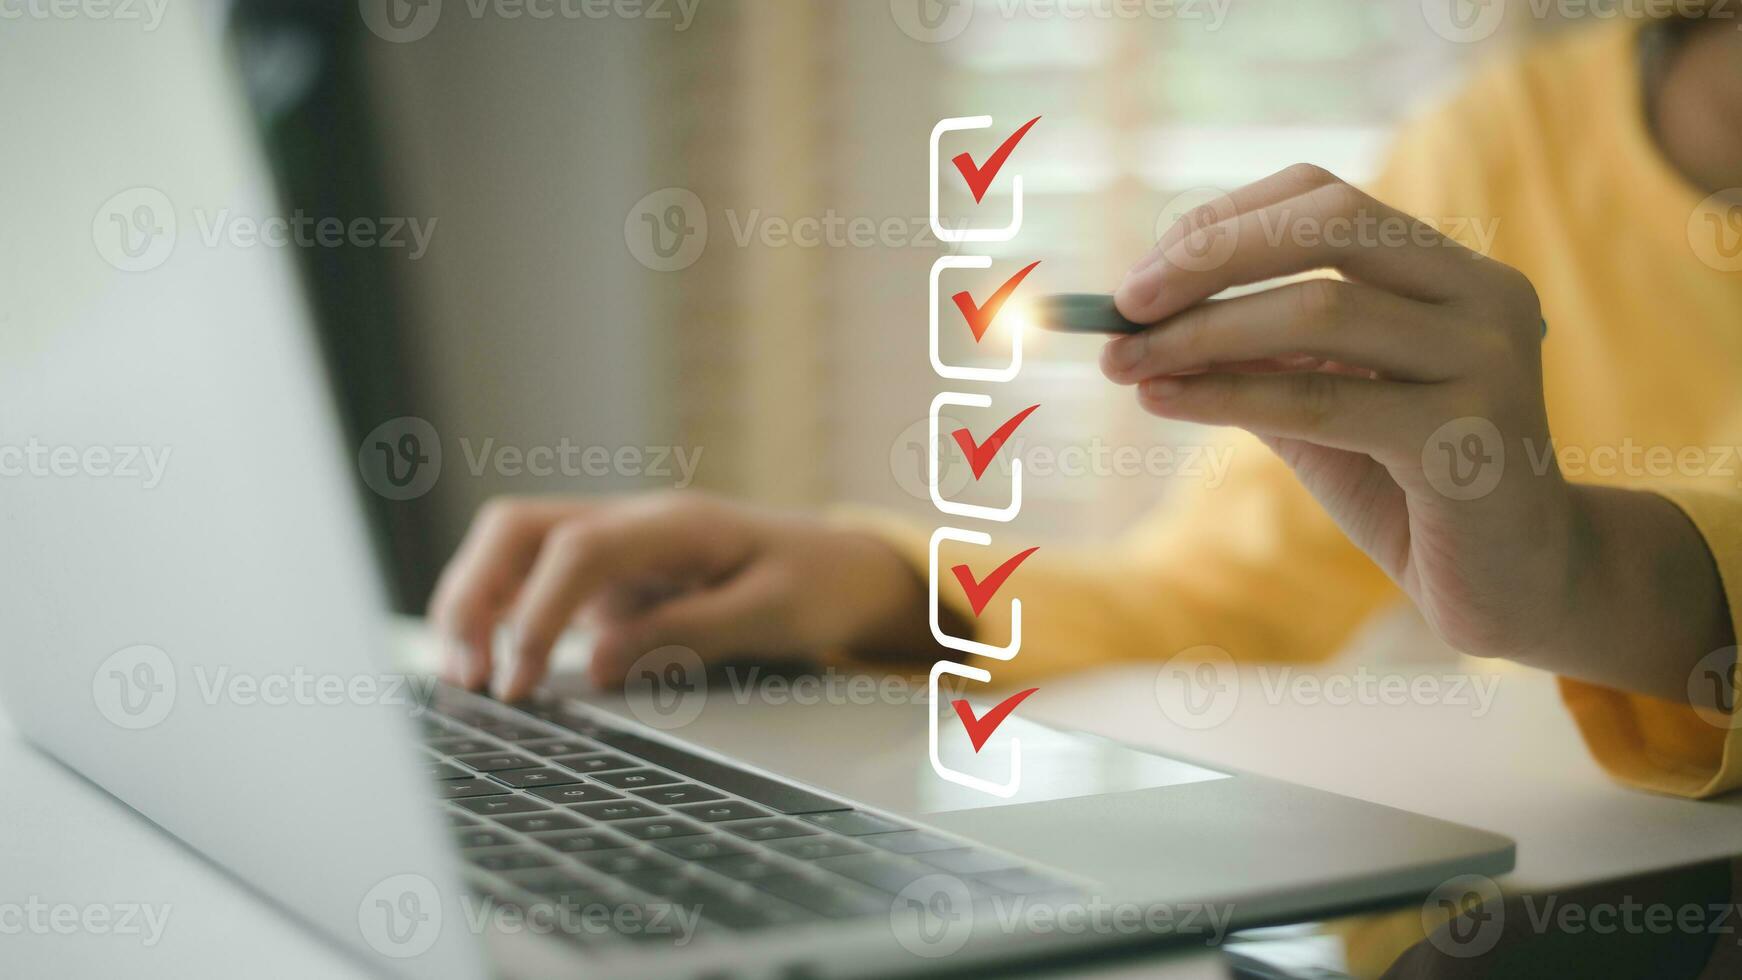 Women use pens to tick the correct sign mark in the checkbox for the quality document control checklist and business approves project concept. photo